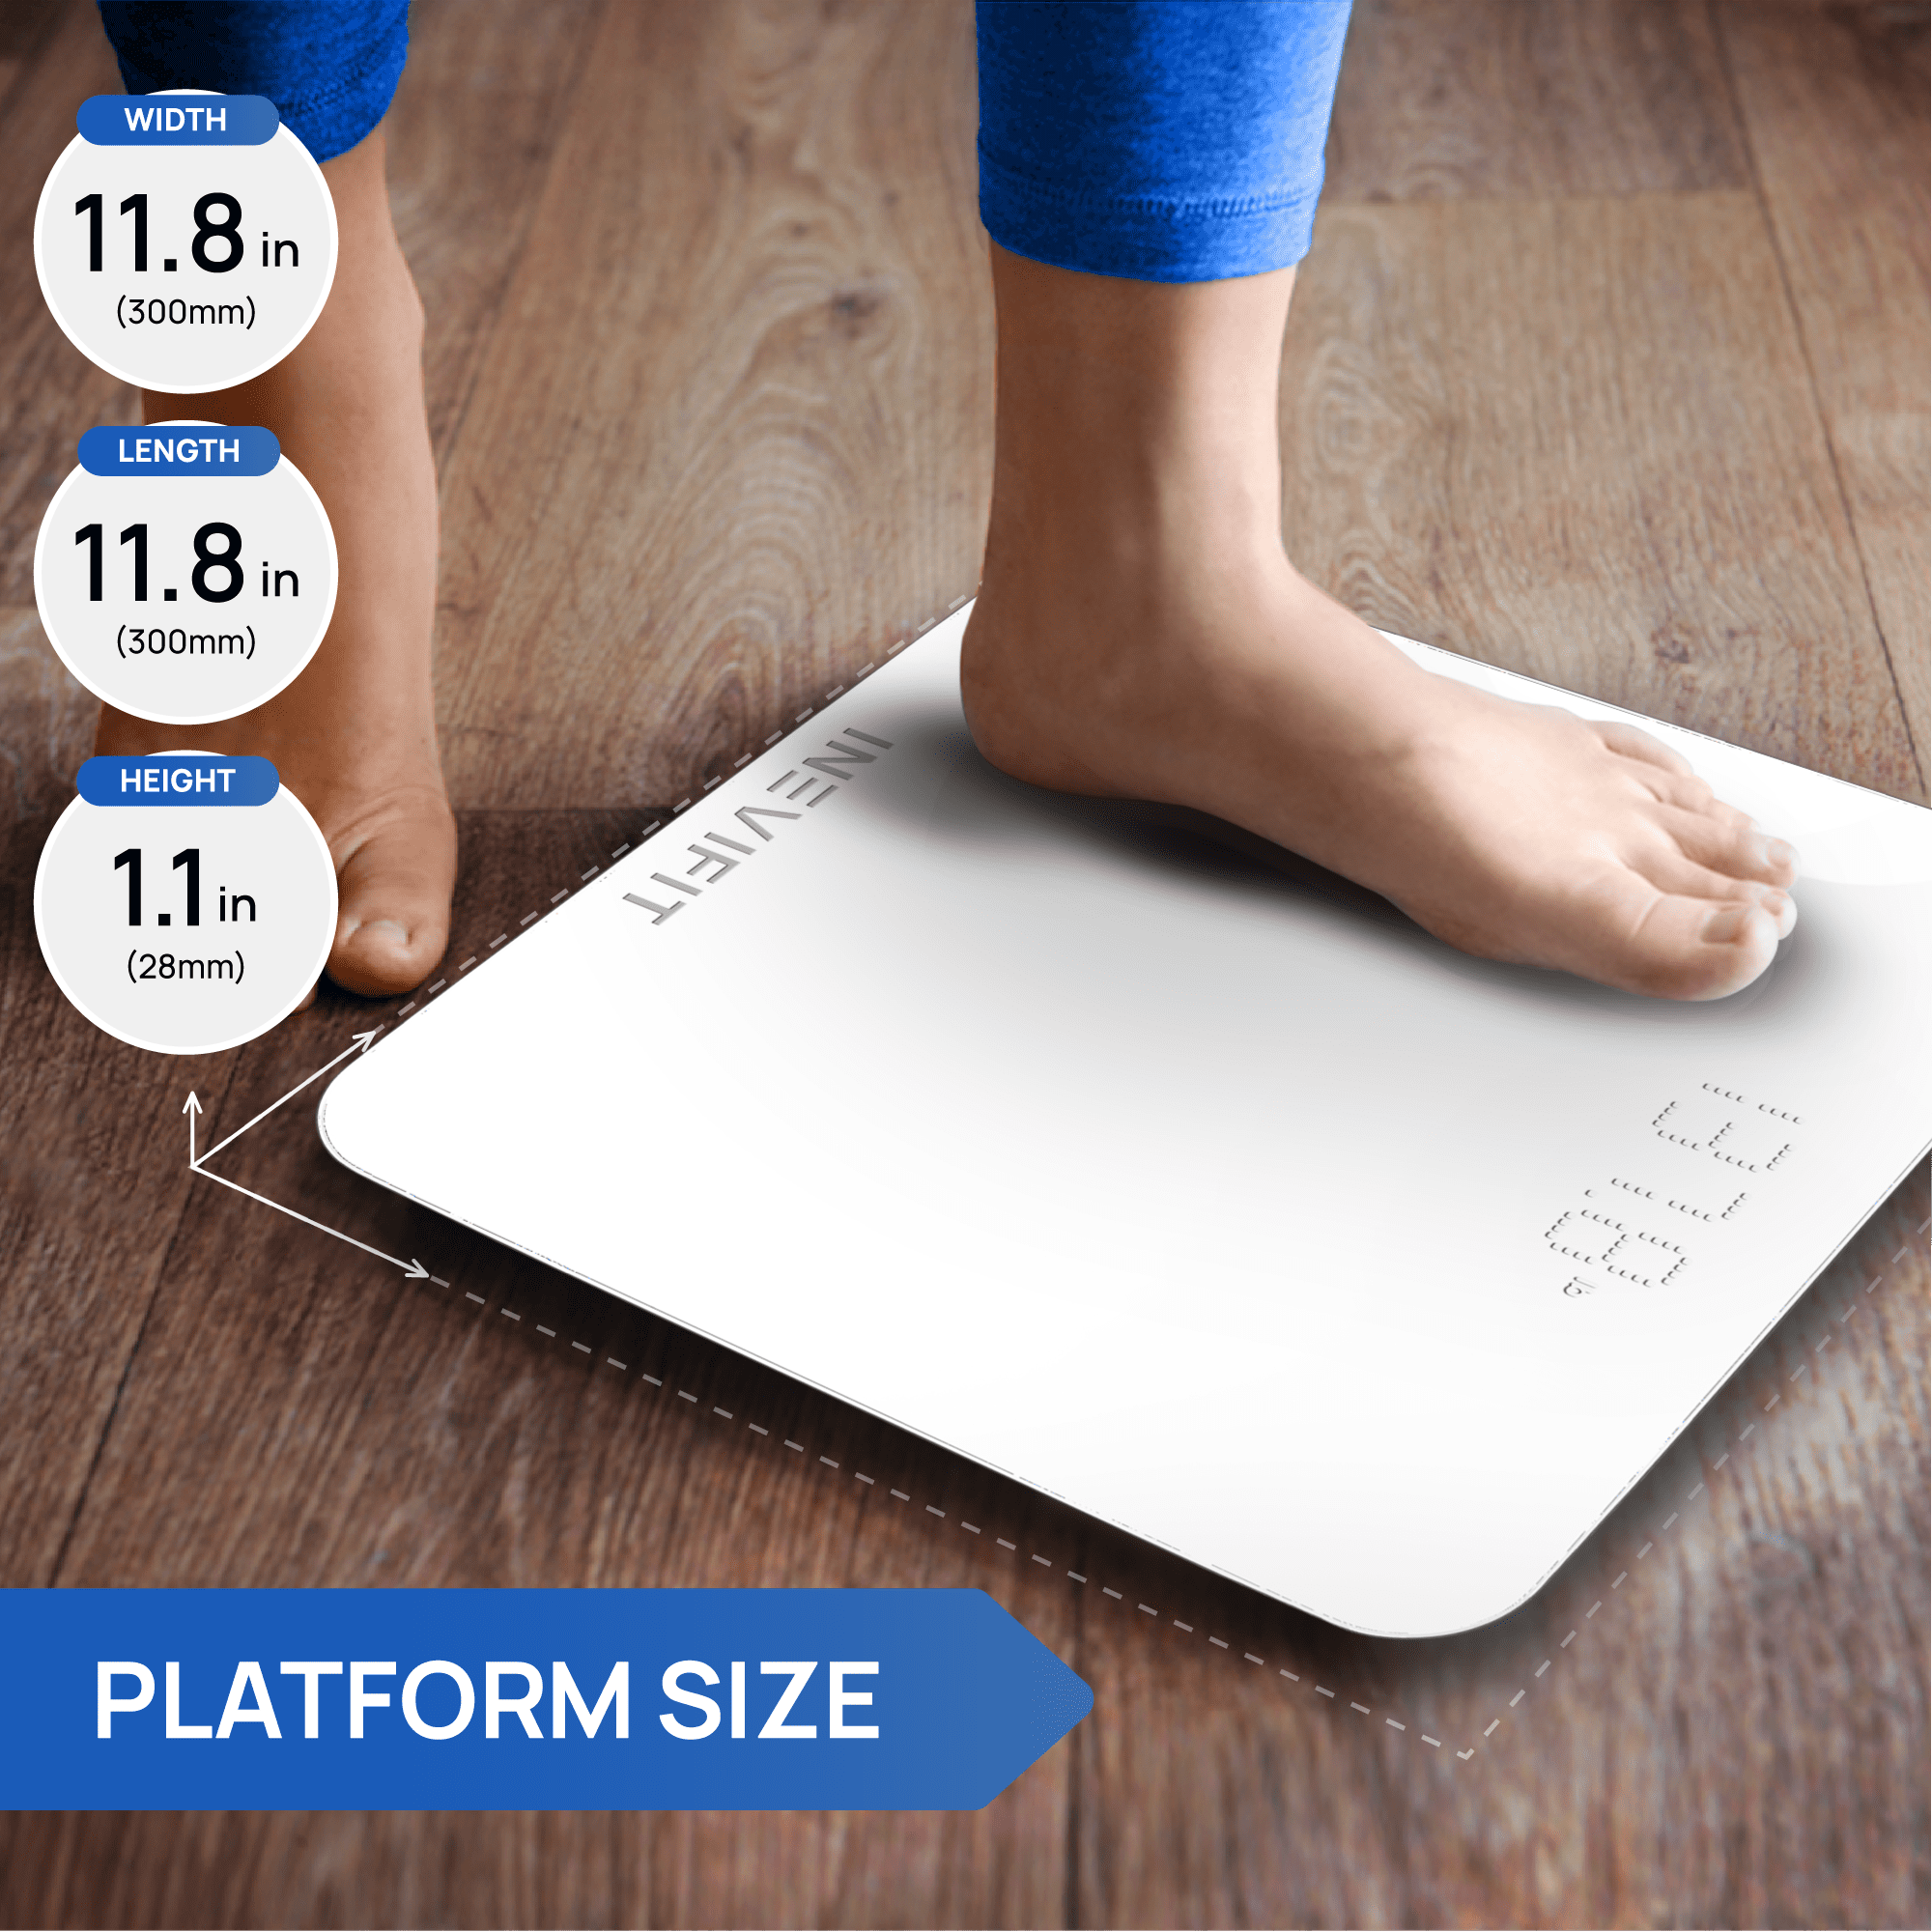  INEVIFIT Bathroom Scale, Highly Accurate Digital Bathroom Body  Scale, Measures Weight up to 400 lbs. Includes Batteries : inevifit: Health  & Household